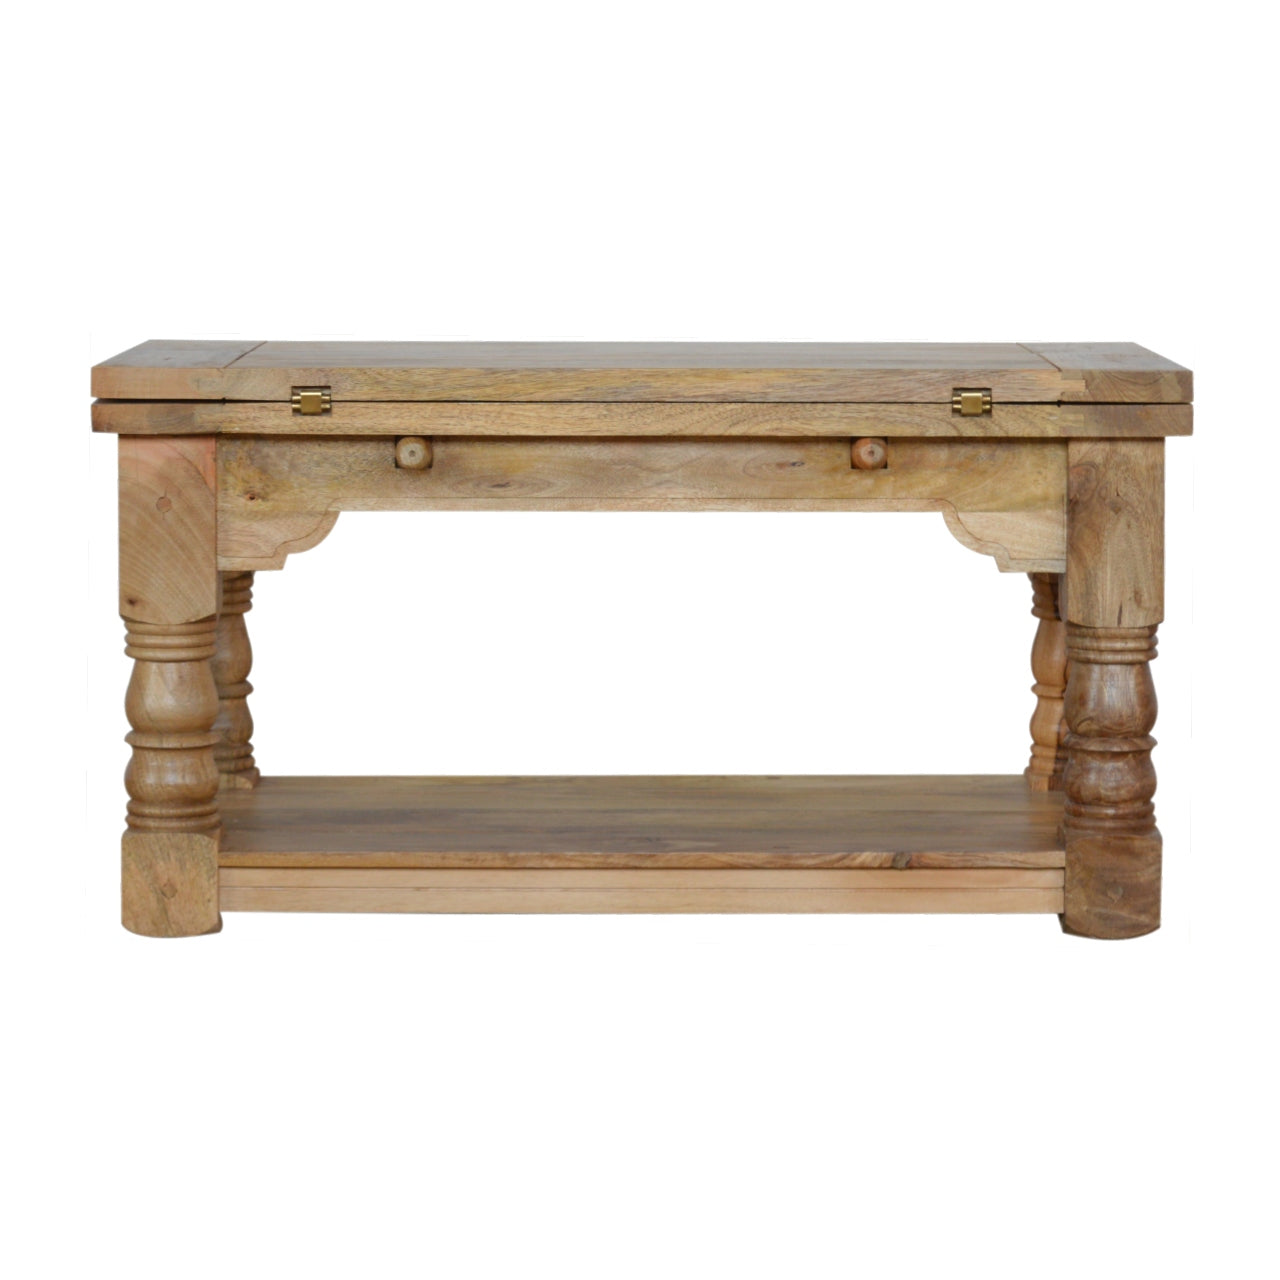 Extending Royale Trilogy Coffee Table